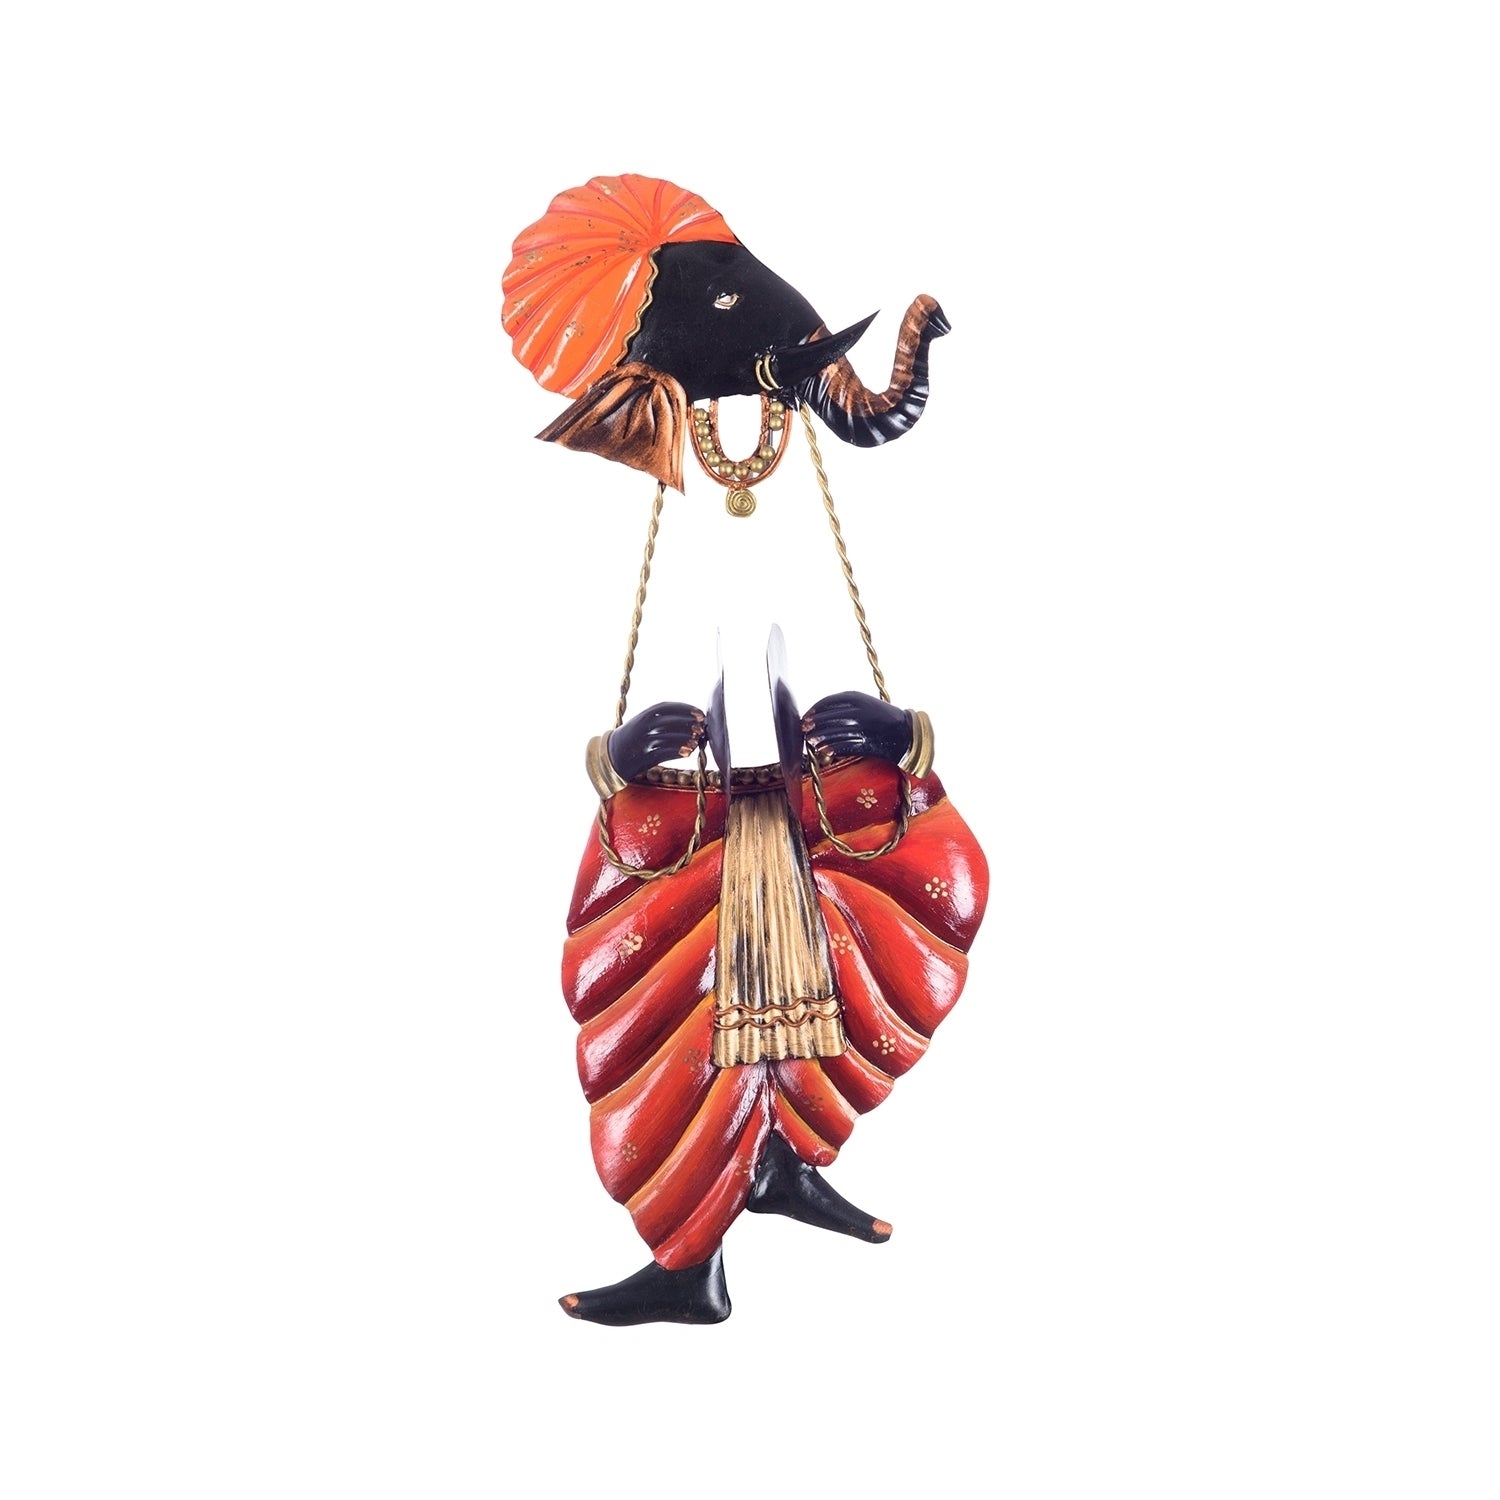 Orange and Black Wrought Iron Lord Ganesha playing Taal Wall Hanging 1